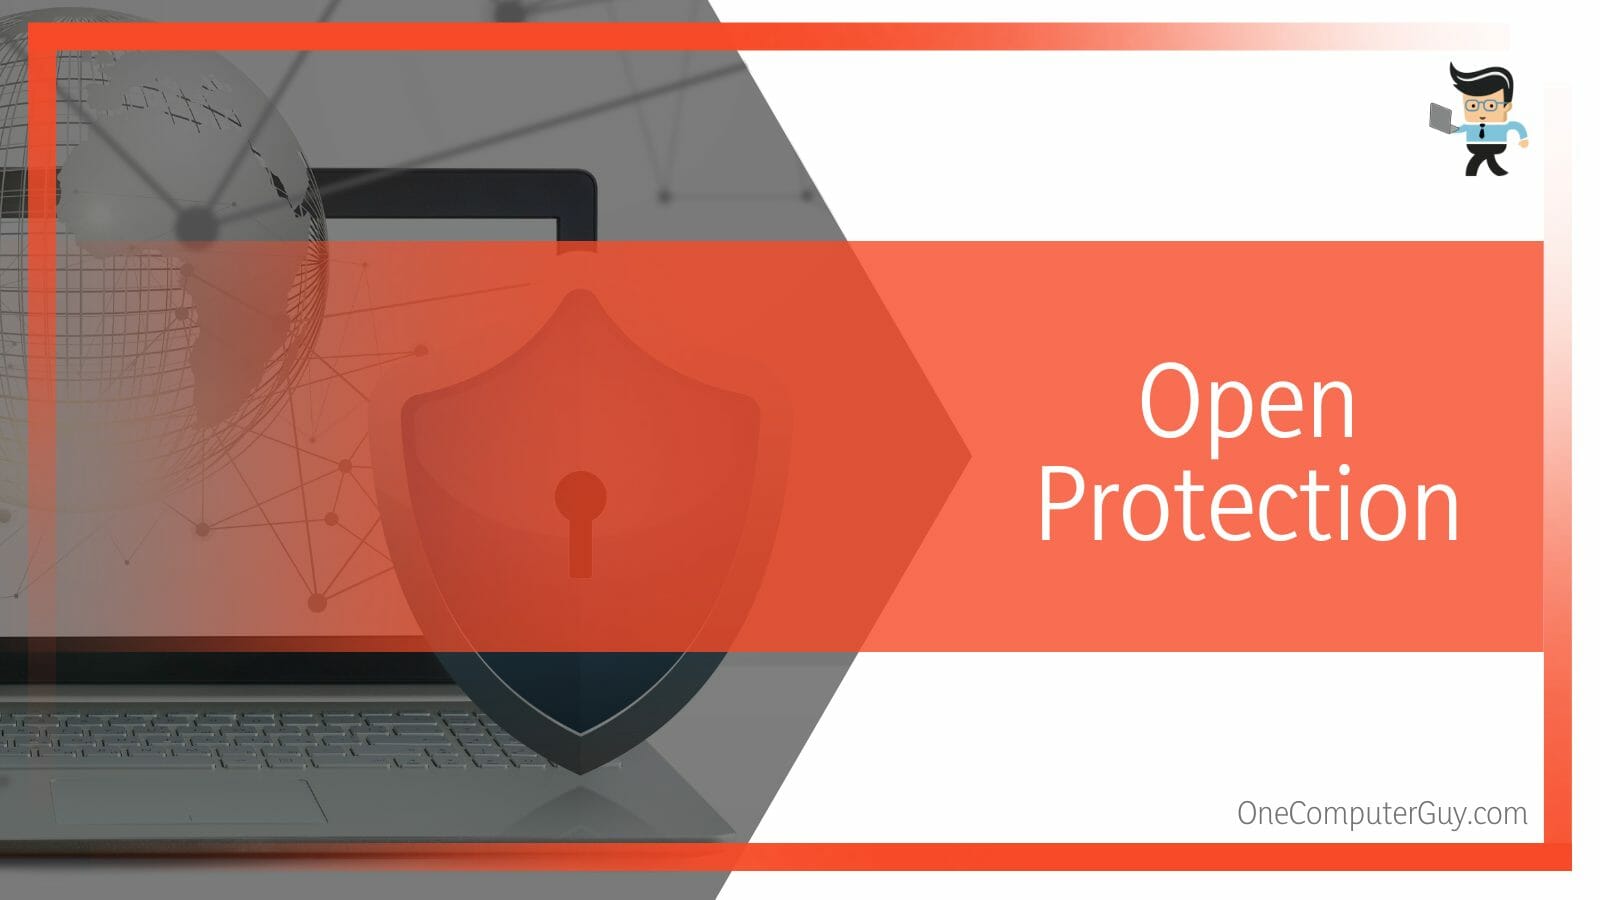 Open Protection settings of the Firewall